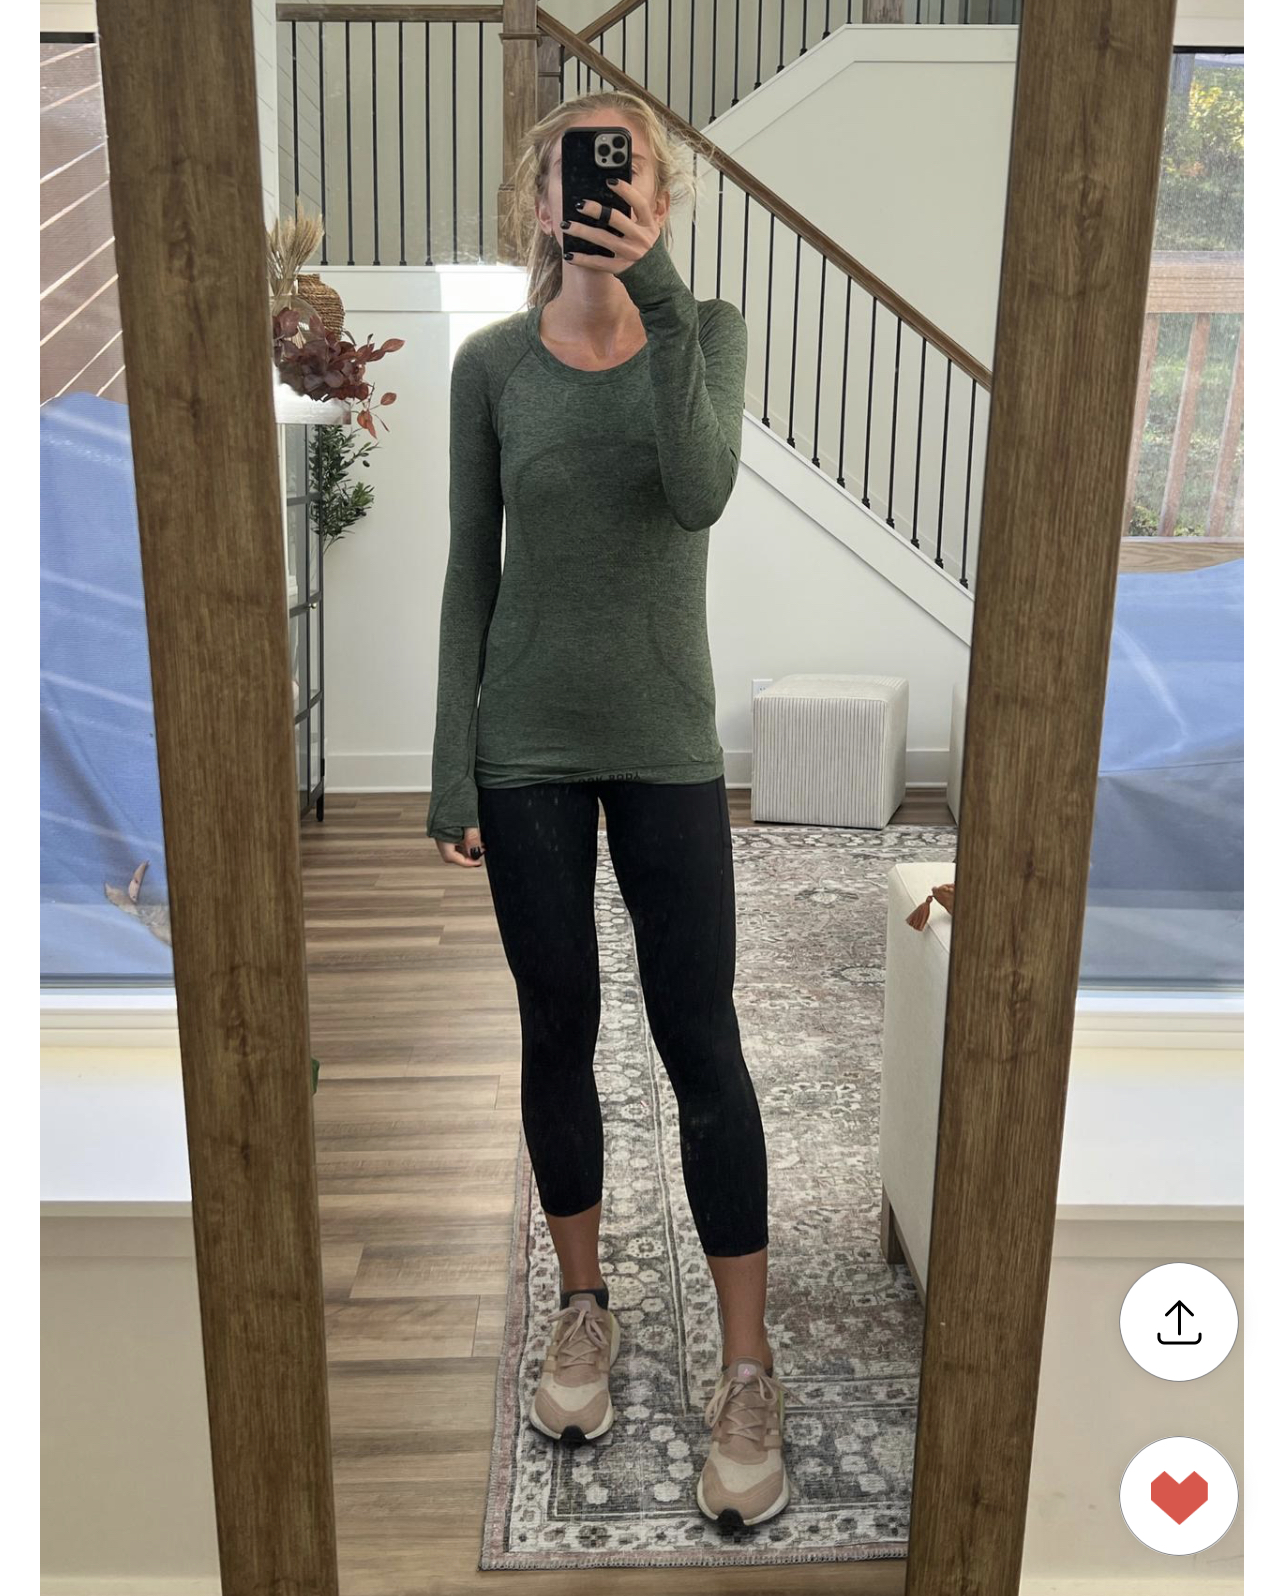 hiking outfit lululemon active long sleeve top with leggings